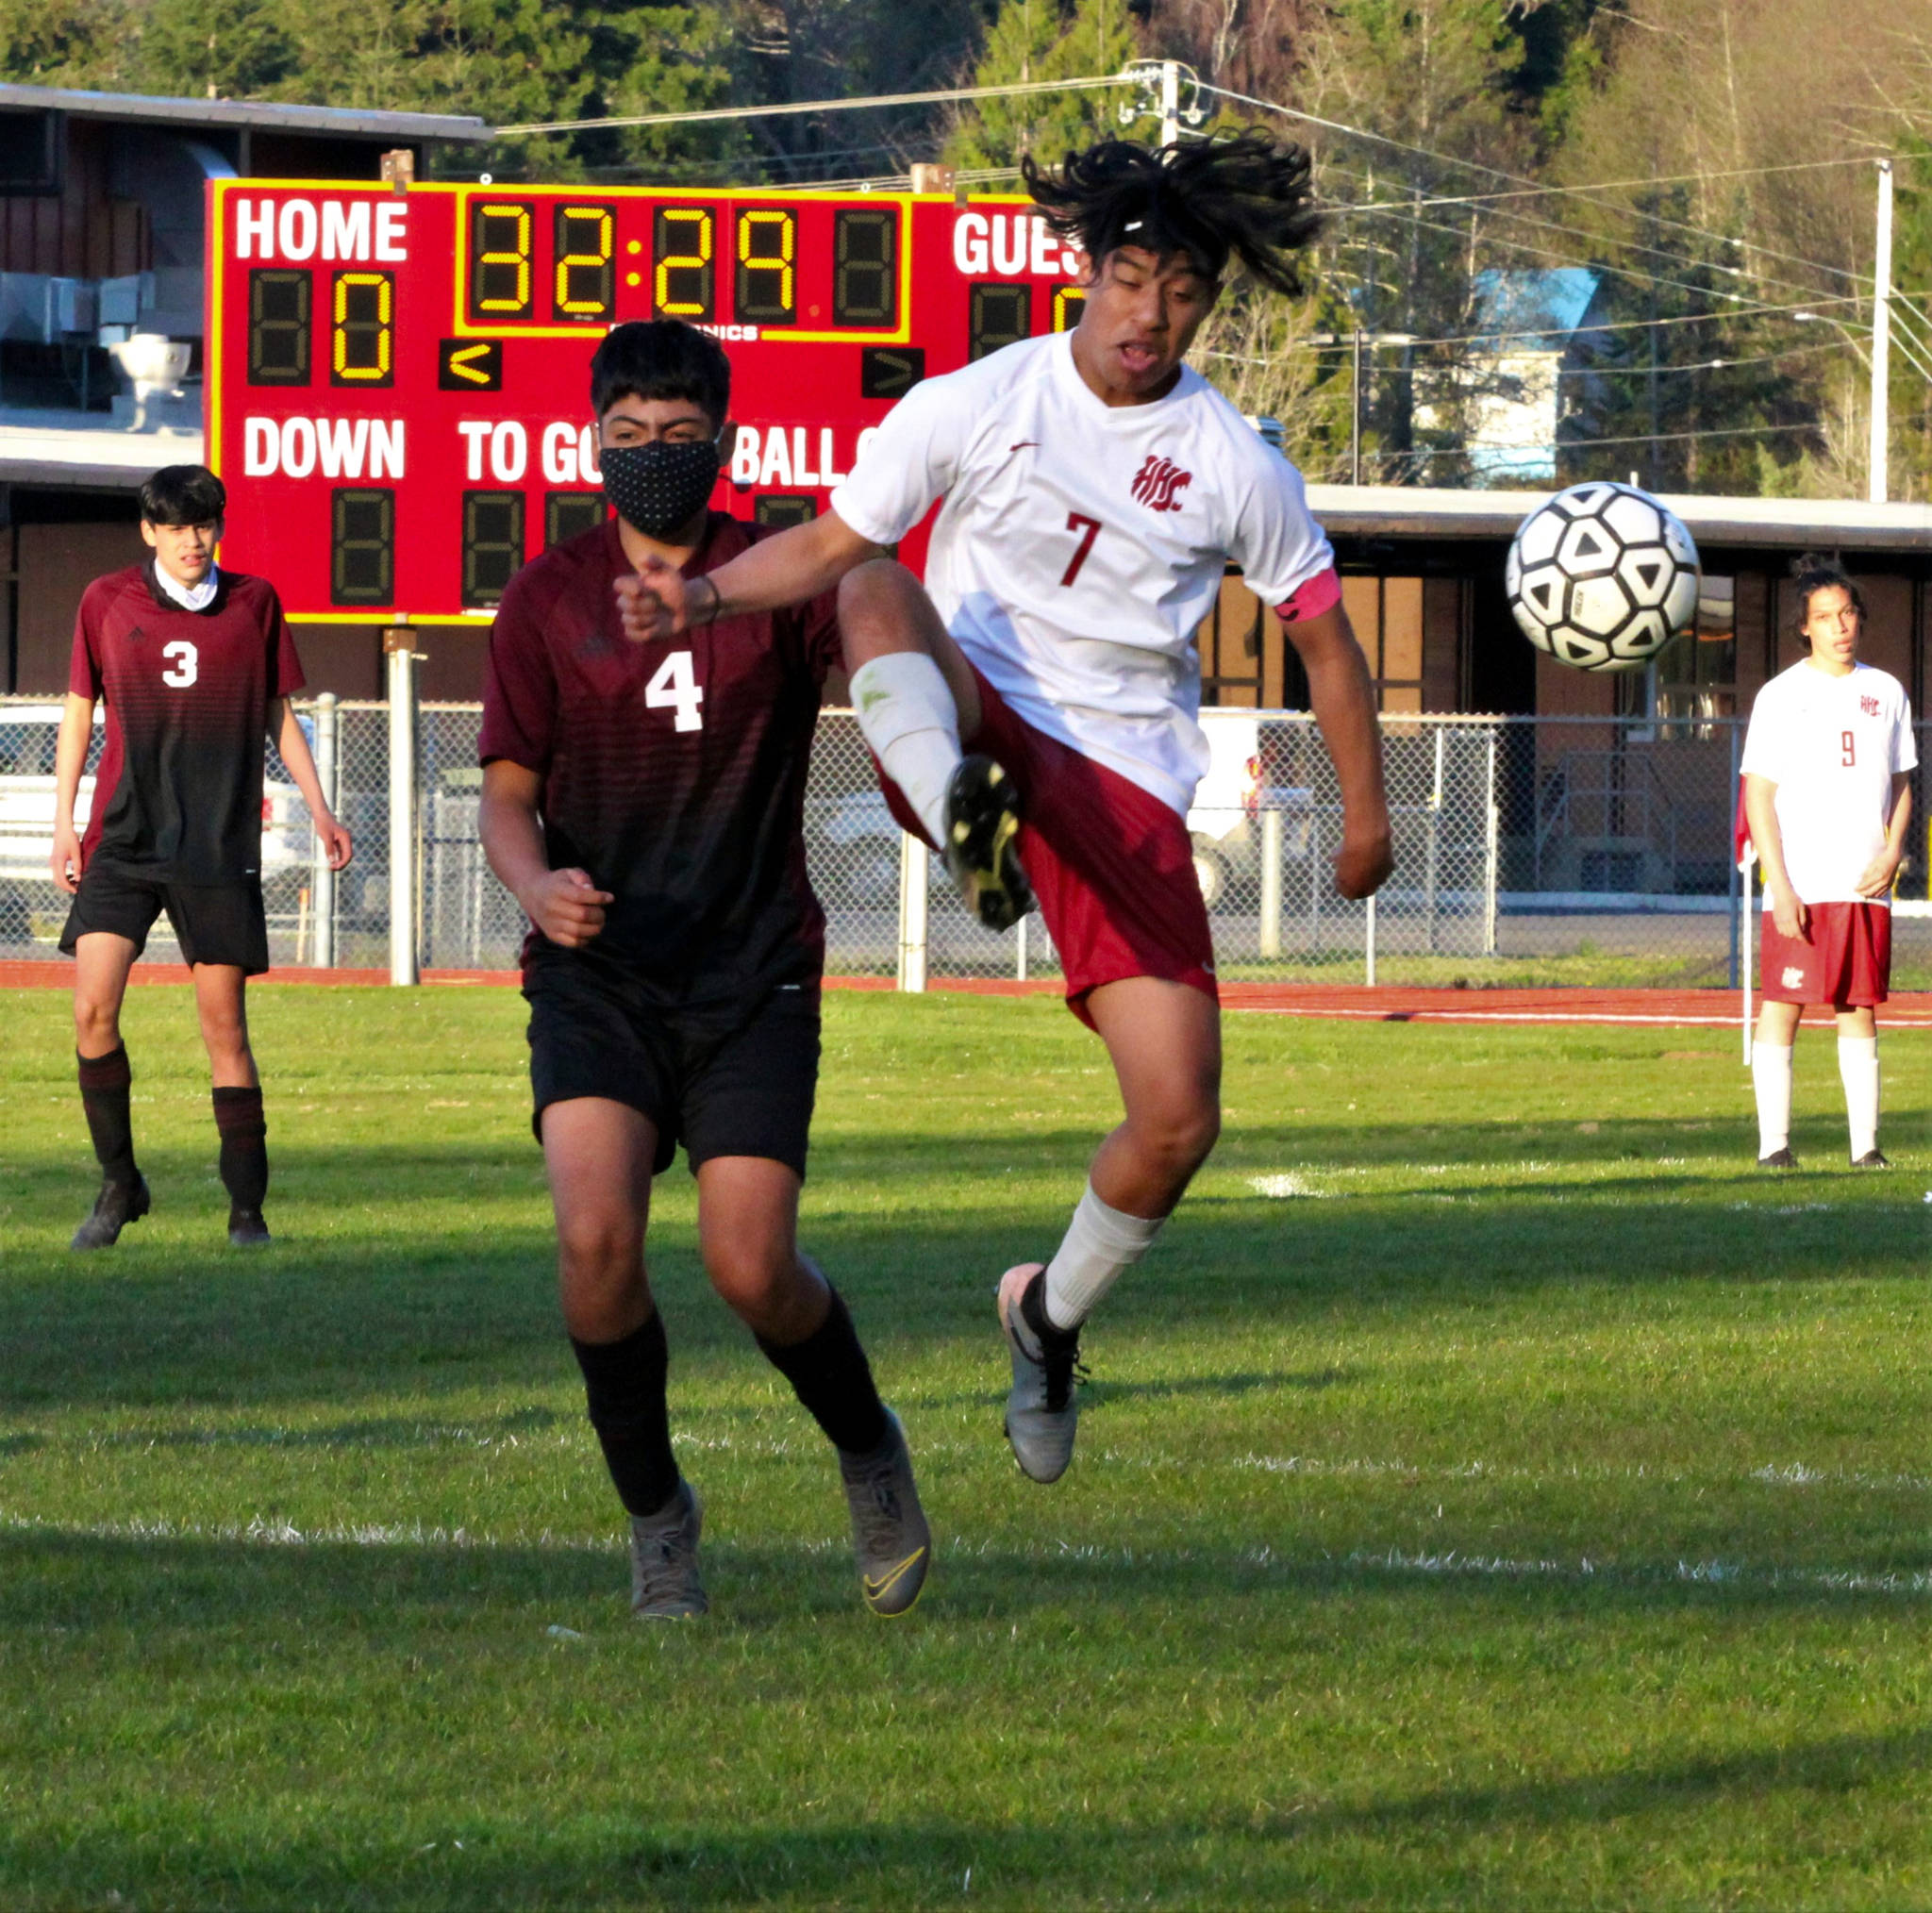 PHOTO BY BEN WINKELMAN 
Hoquiam midfielder Kevin Catalan (7) leaps to make a play against Raymond-South Bend’s Christopher Quintana Silva in Hoquiam’s 4-3 victory on Tuesday in Hoquiam.